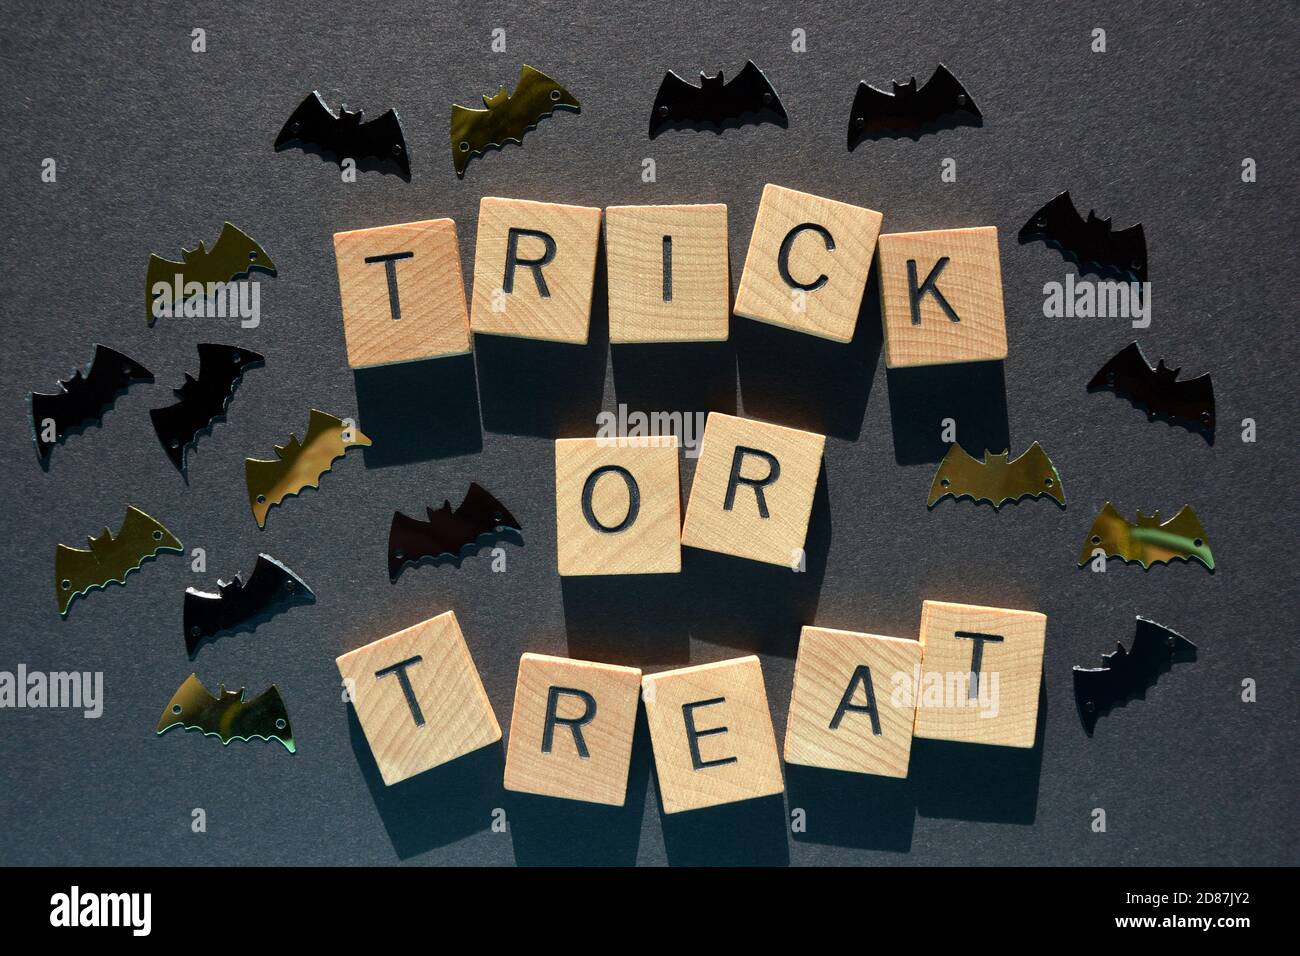 Trick or Treat, words in wooden alphabet letters surround by bat shapes Stock Photo